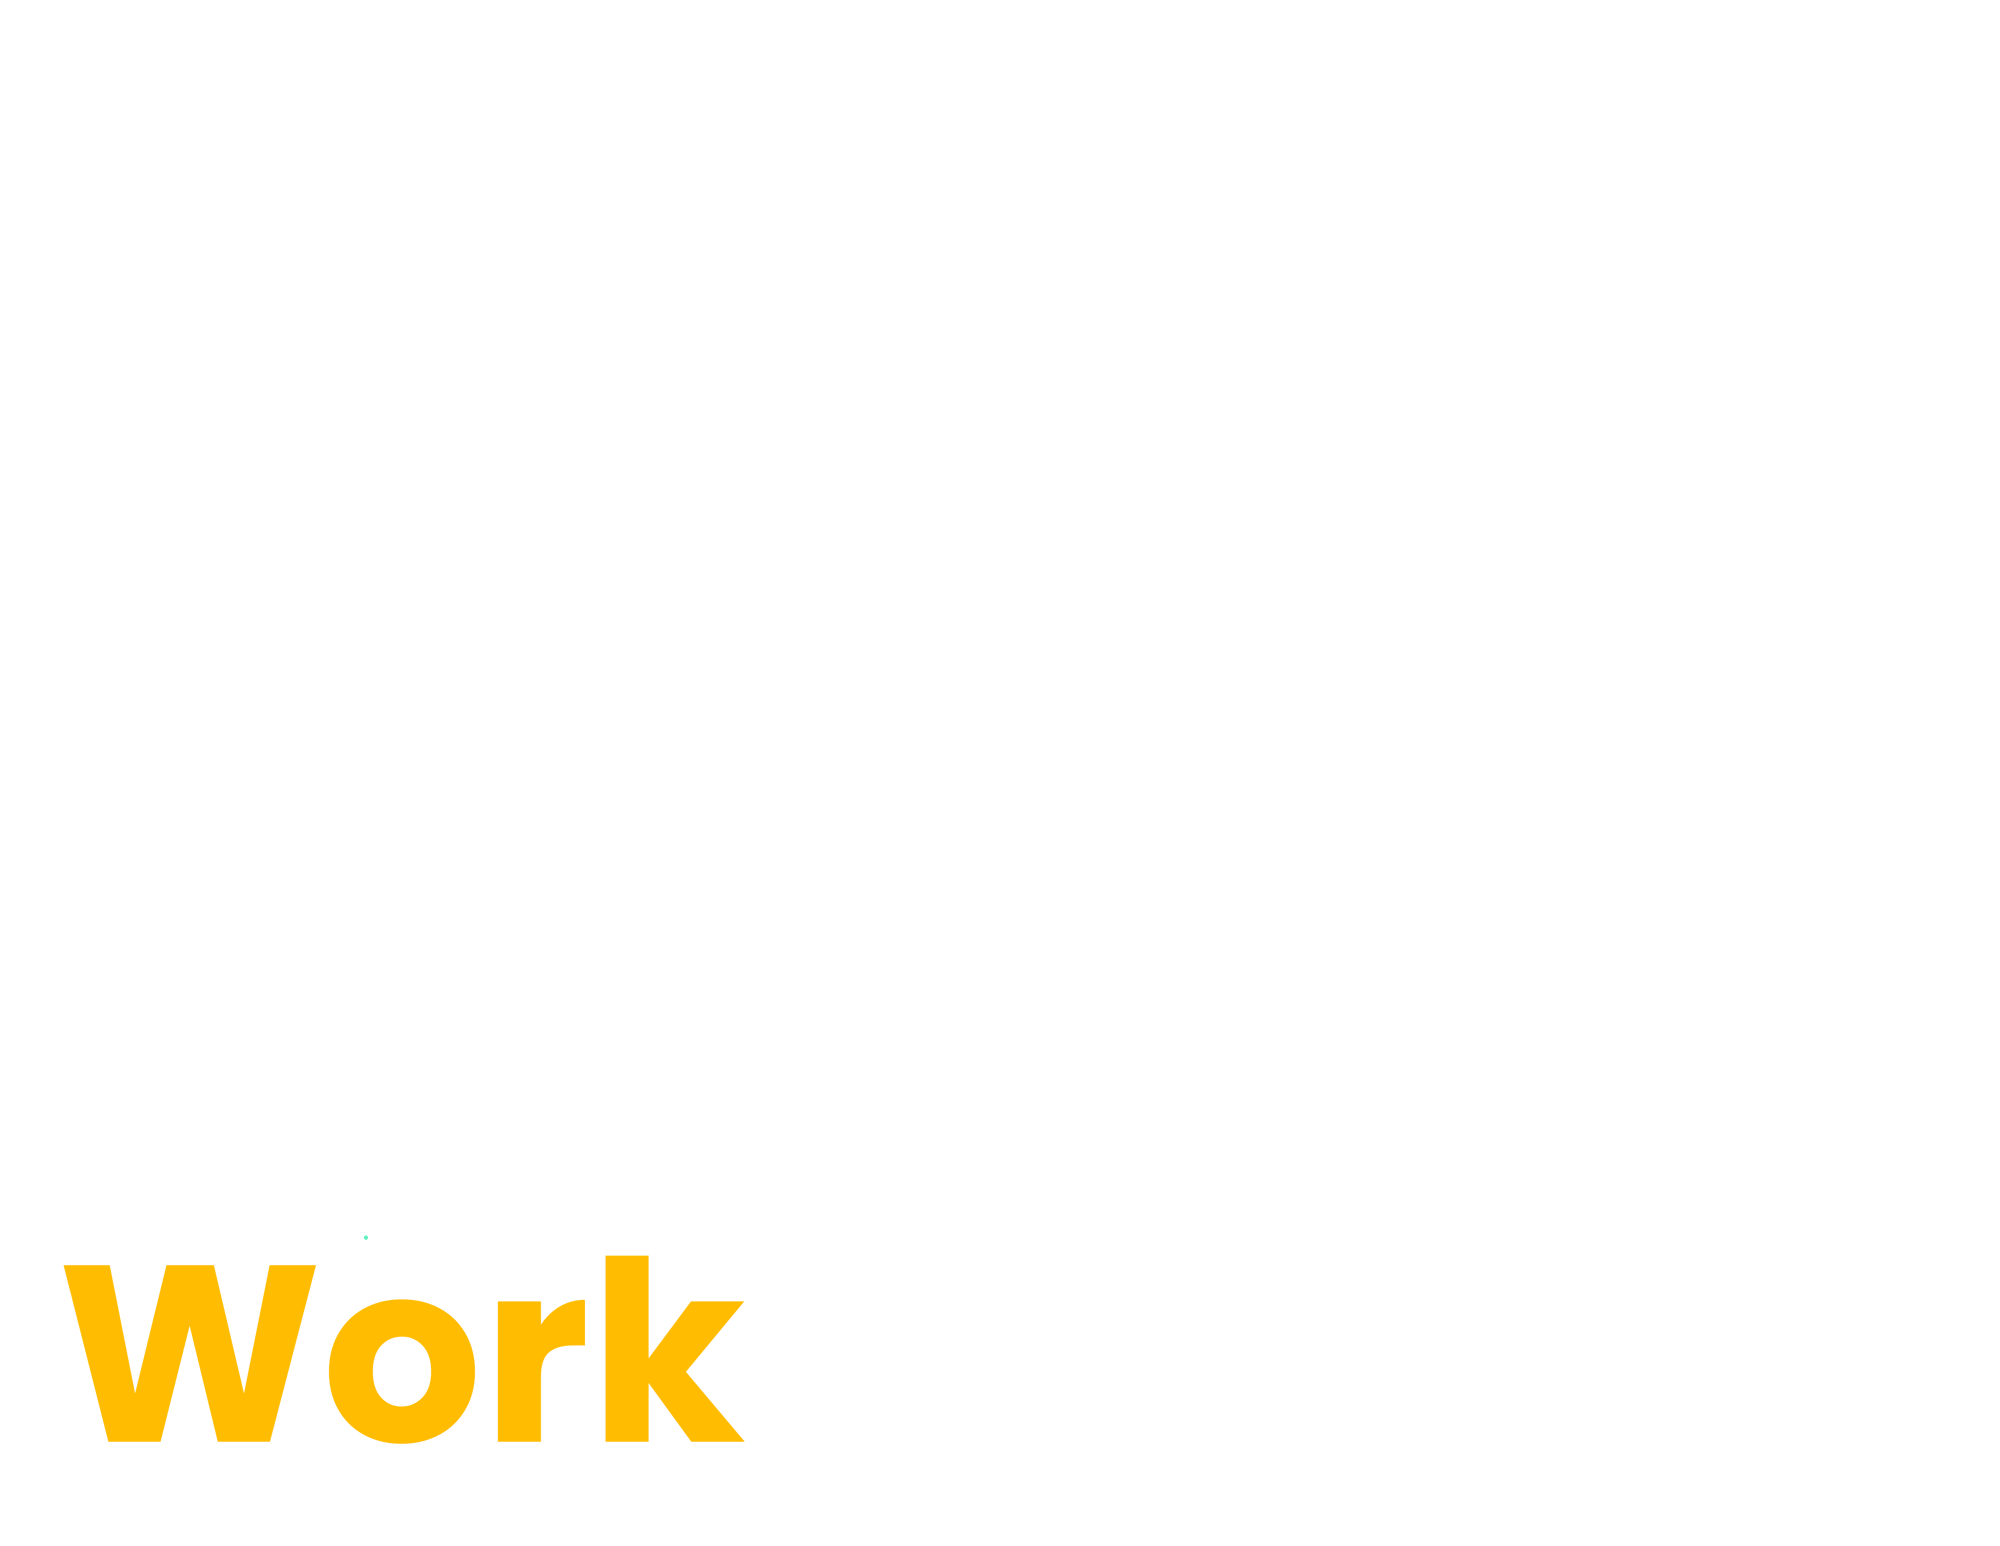 How to Make Remote Work, Work